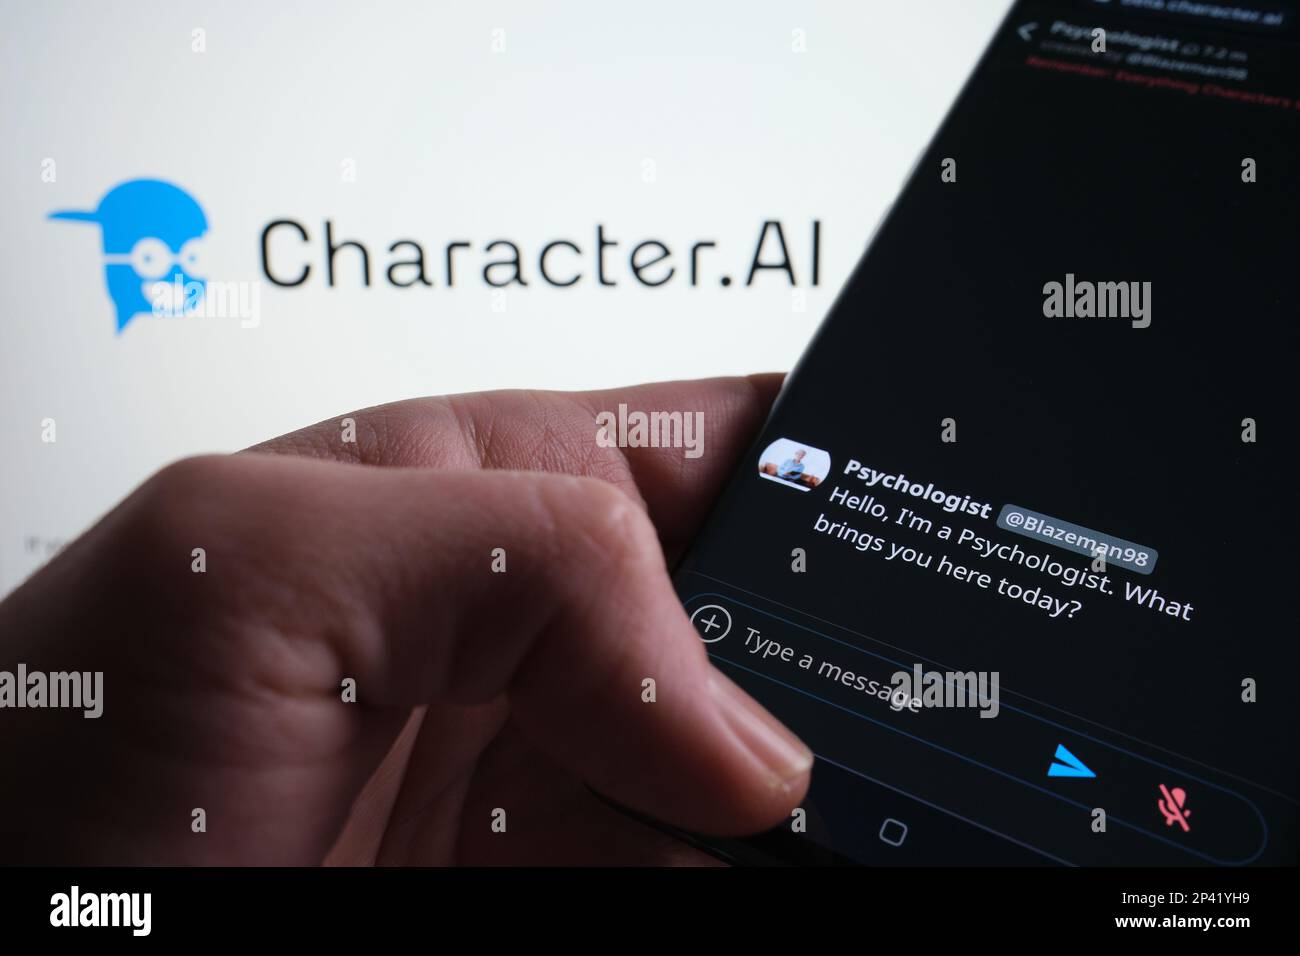 Character AI Chatbot example seen on smartphone screen. Blurred Character.AI logo on the background. Stafford, UK, March 5, 2023 Stock Photo